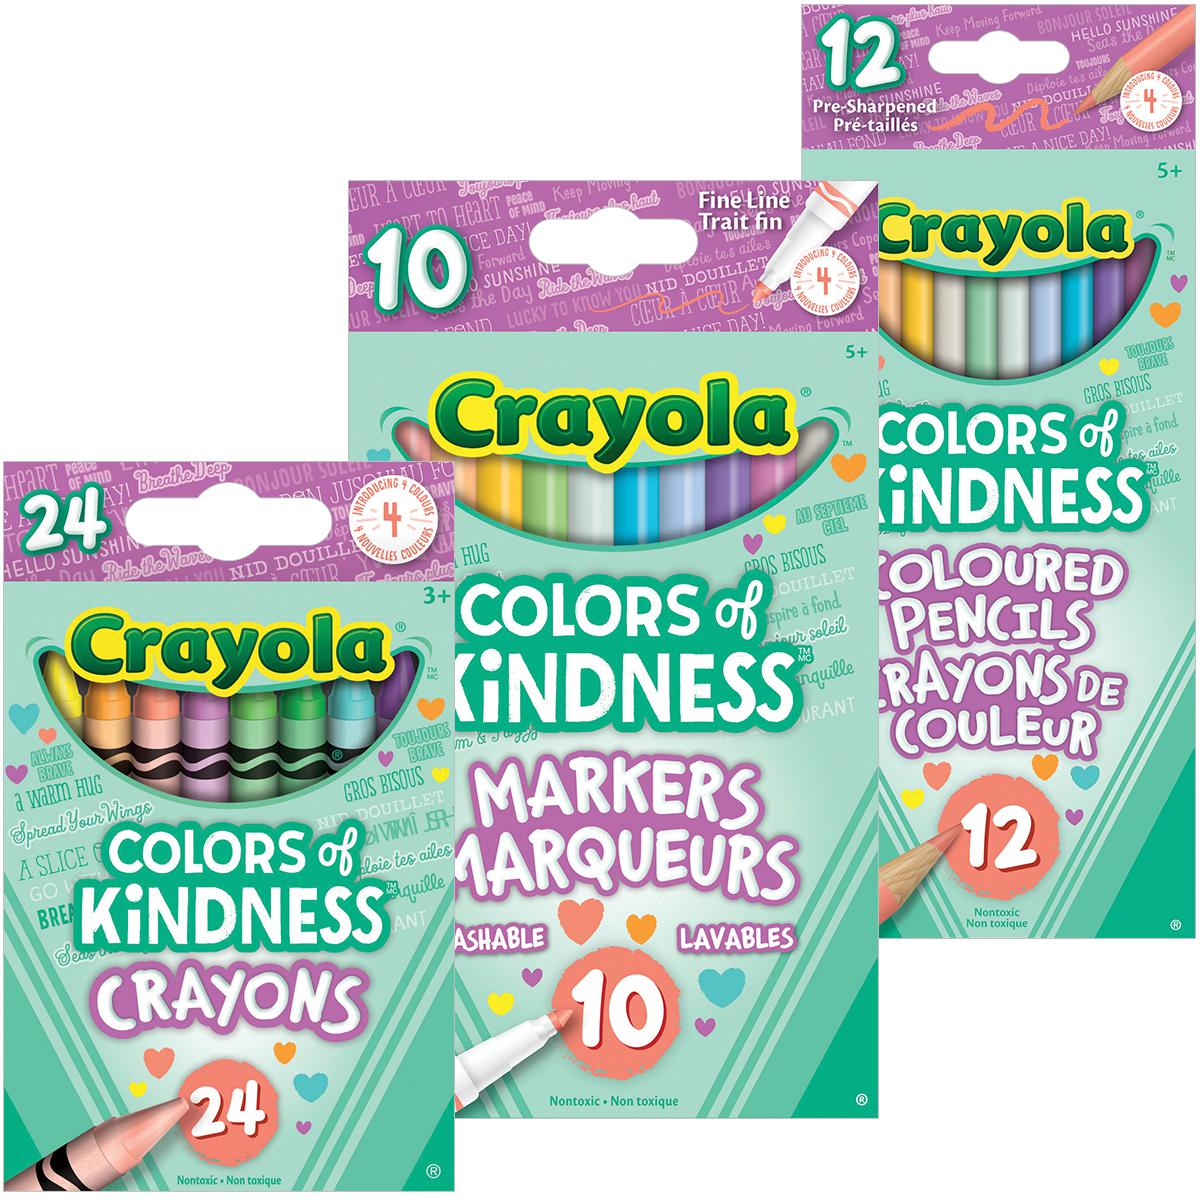  Crayola: Colors of Kindness 3-Pack 